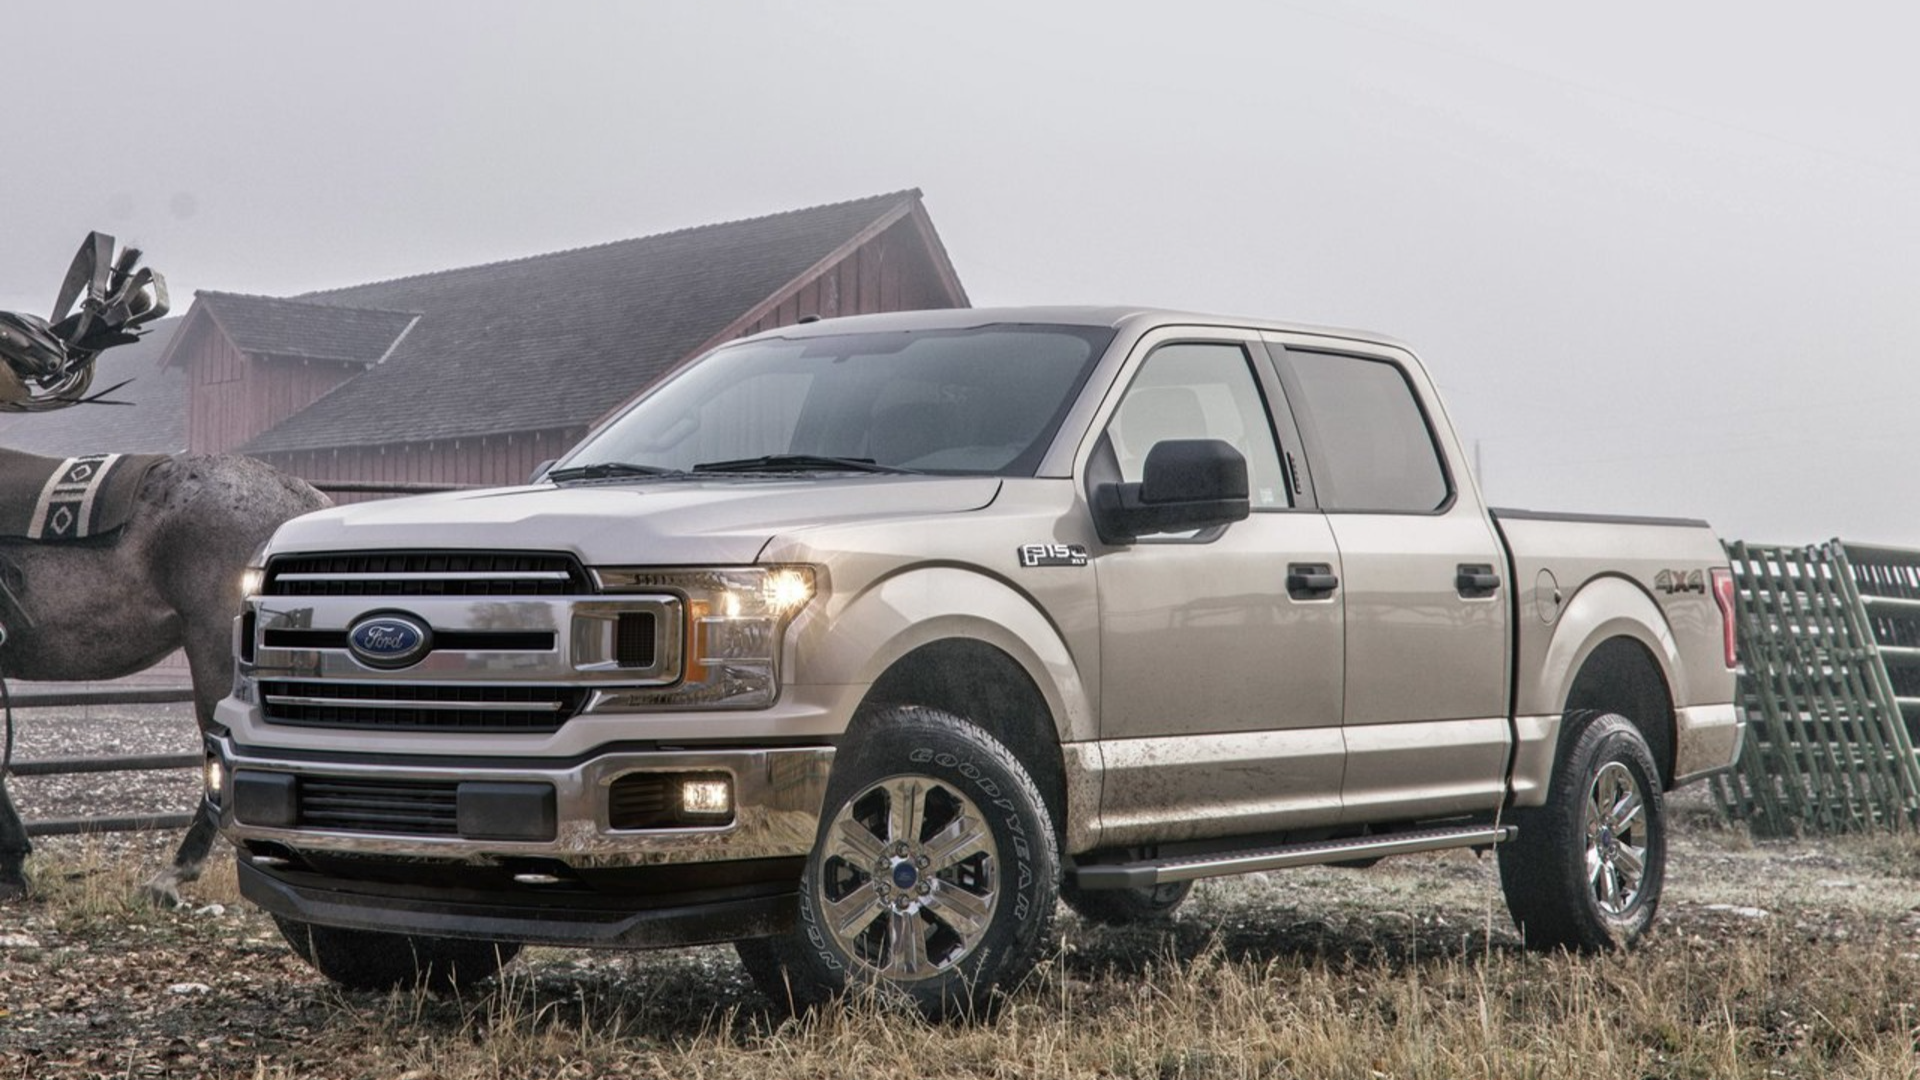 2018 Ford F-150 pickup truck parked